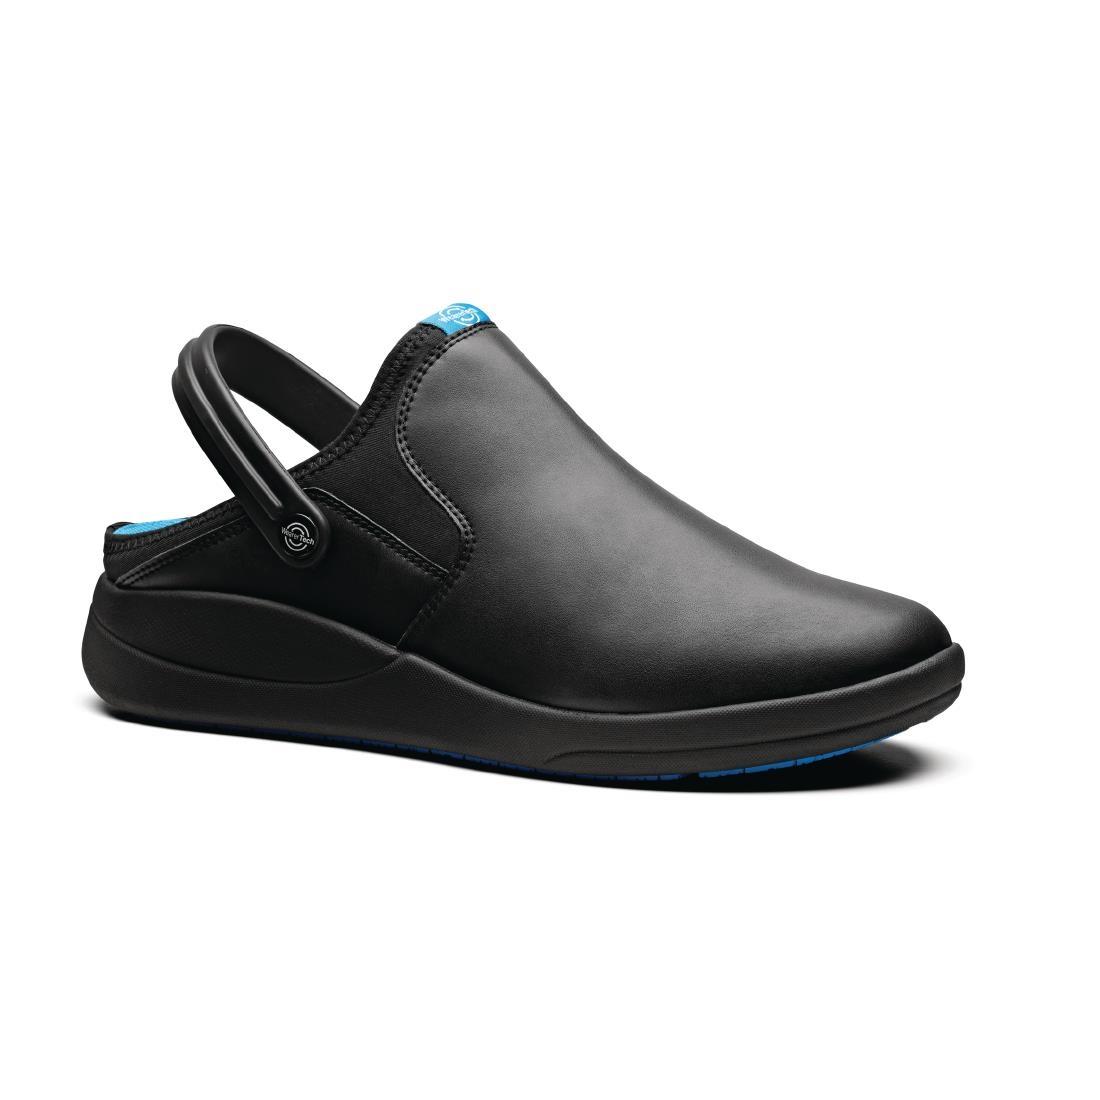 WearerTech Refresh Clog Black with Firm Insoles Size 47 - BB556-12  - 2